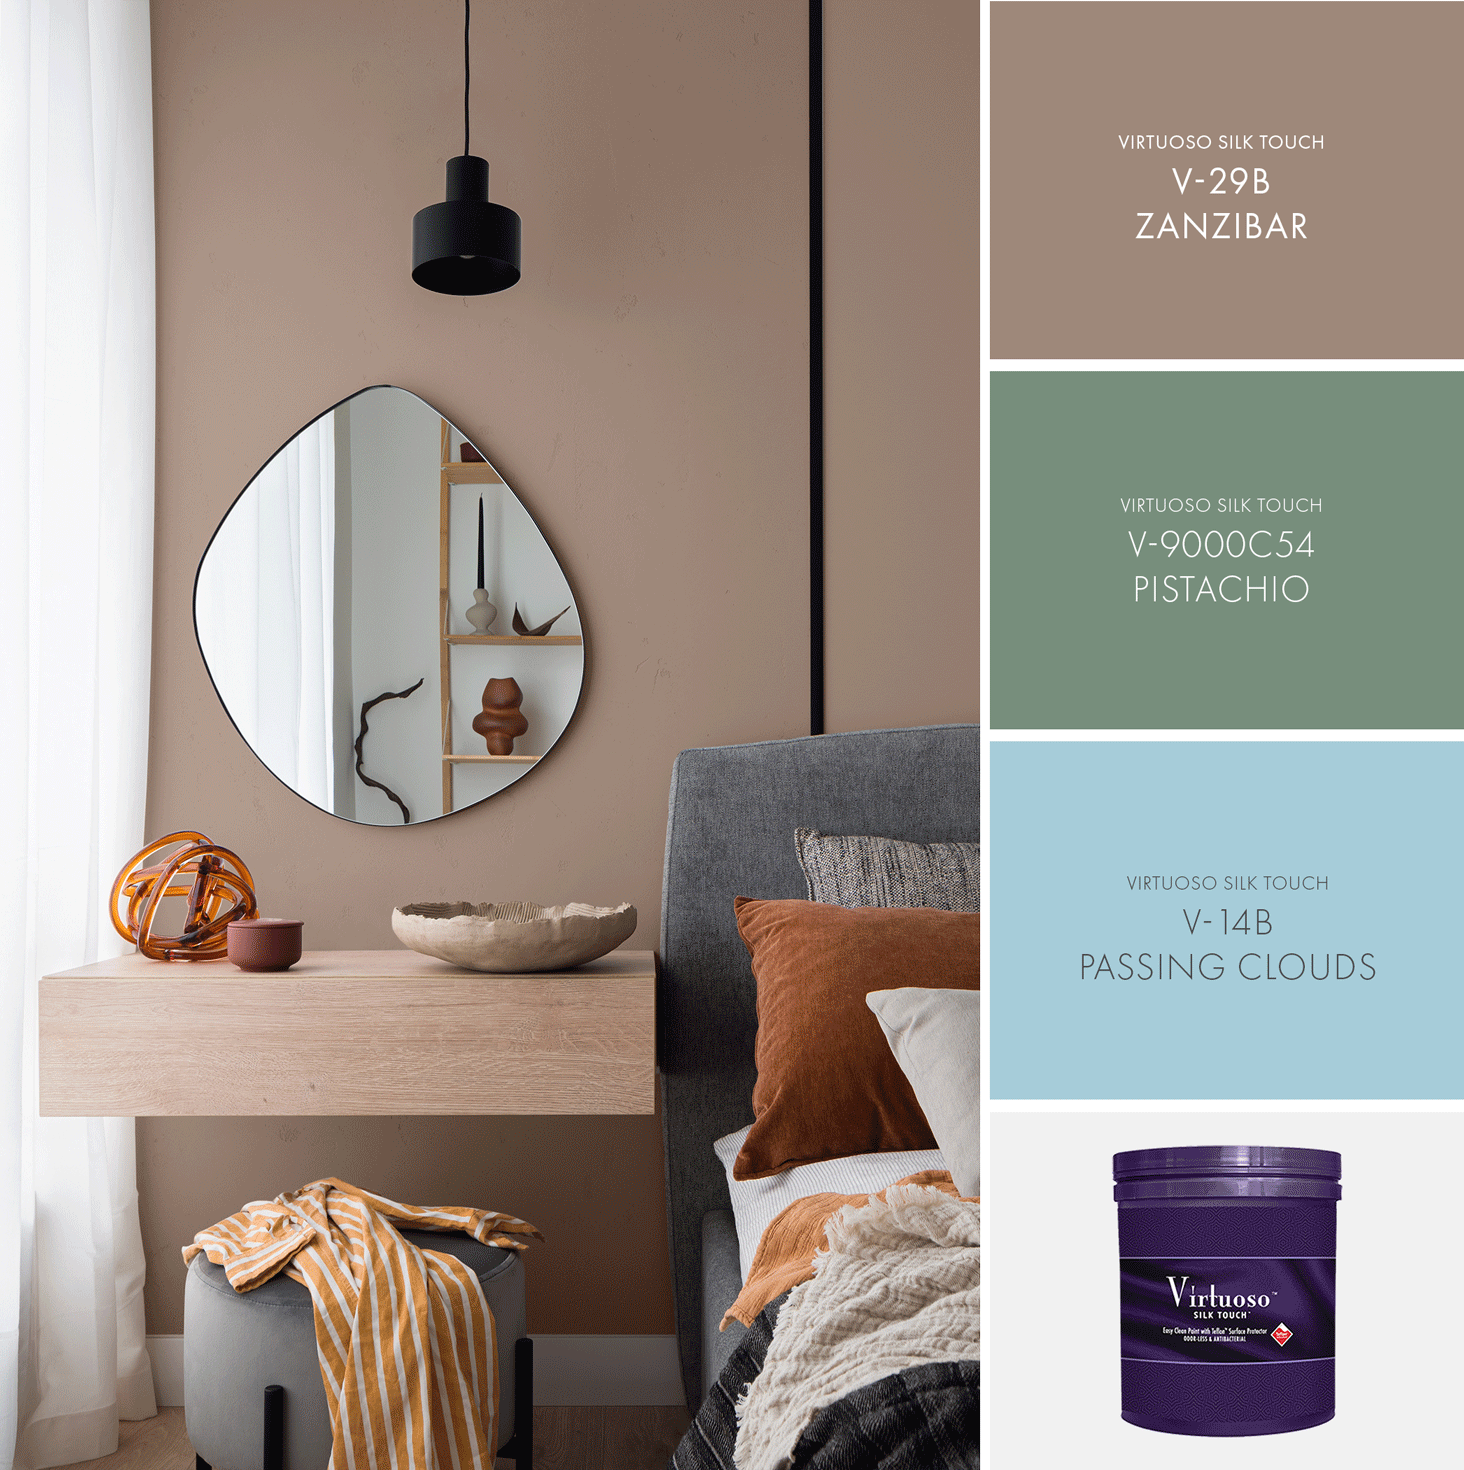 Paint Products and Colors for Your Condo | MyBoysen